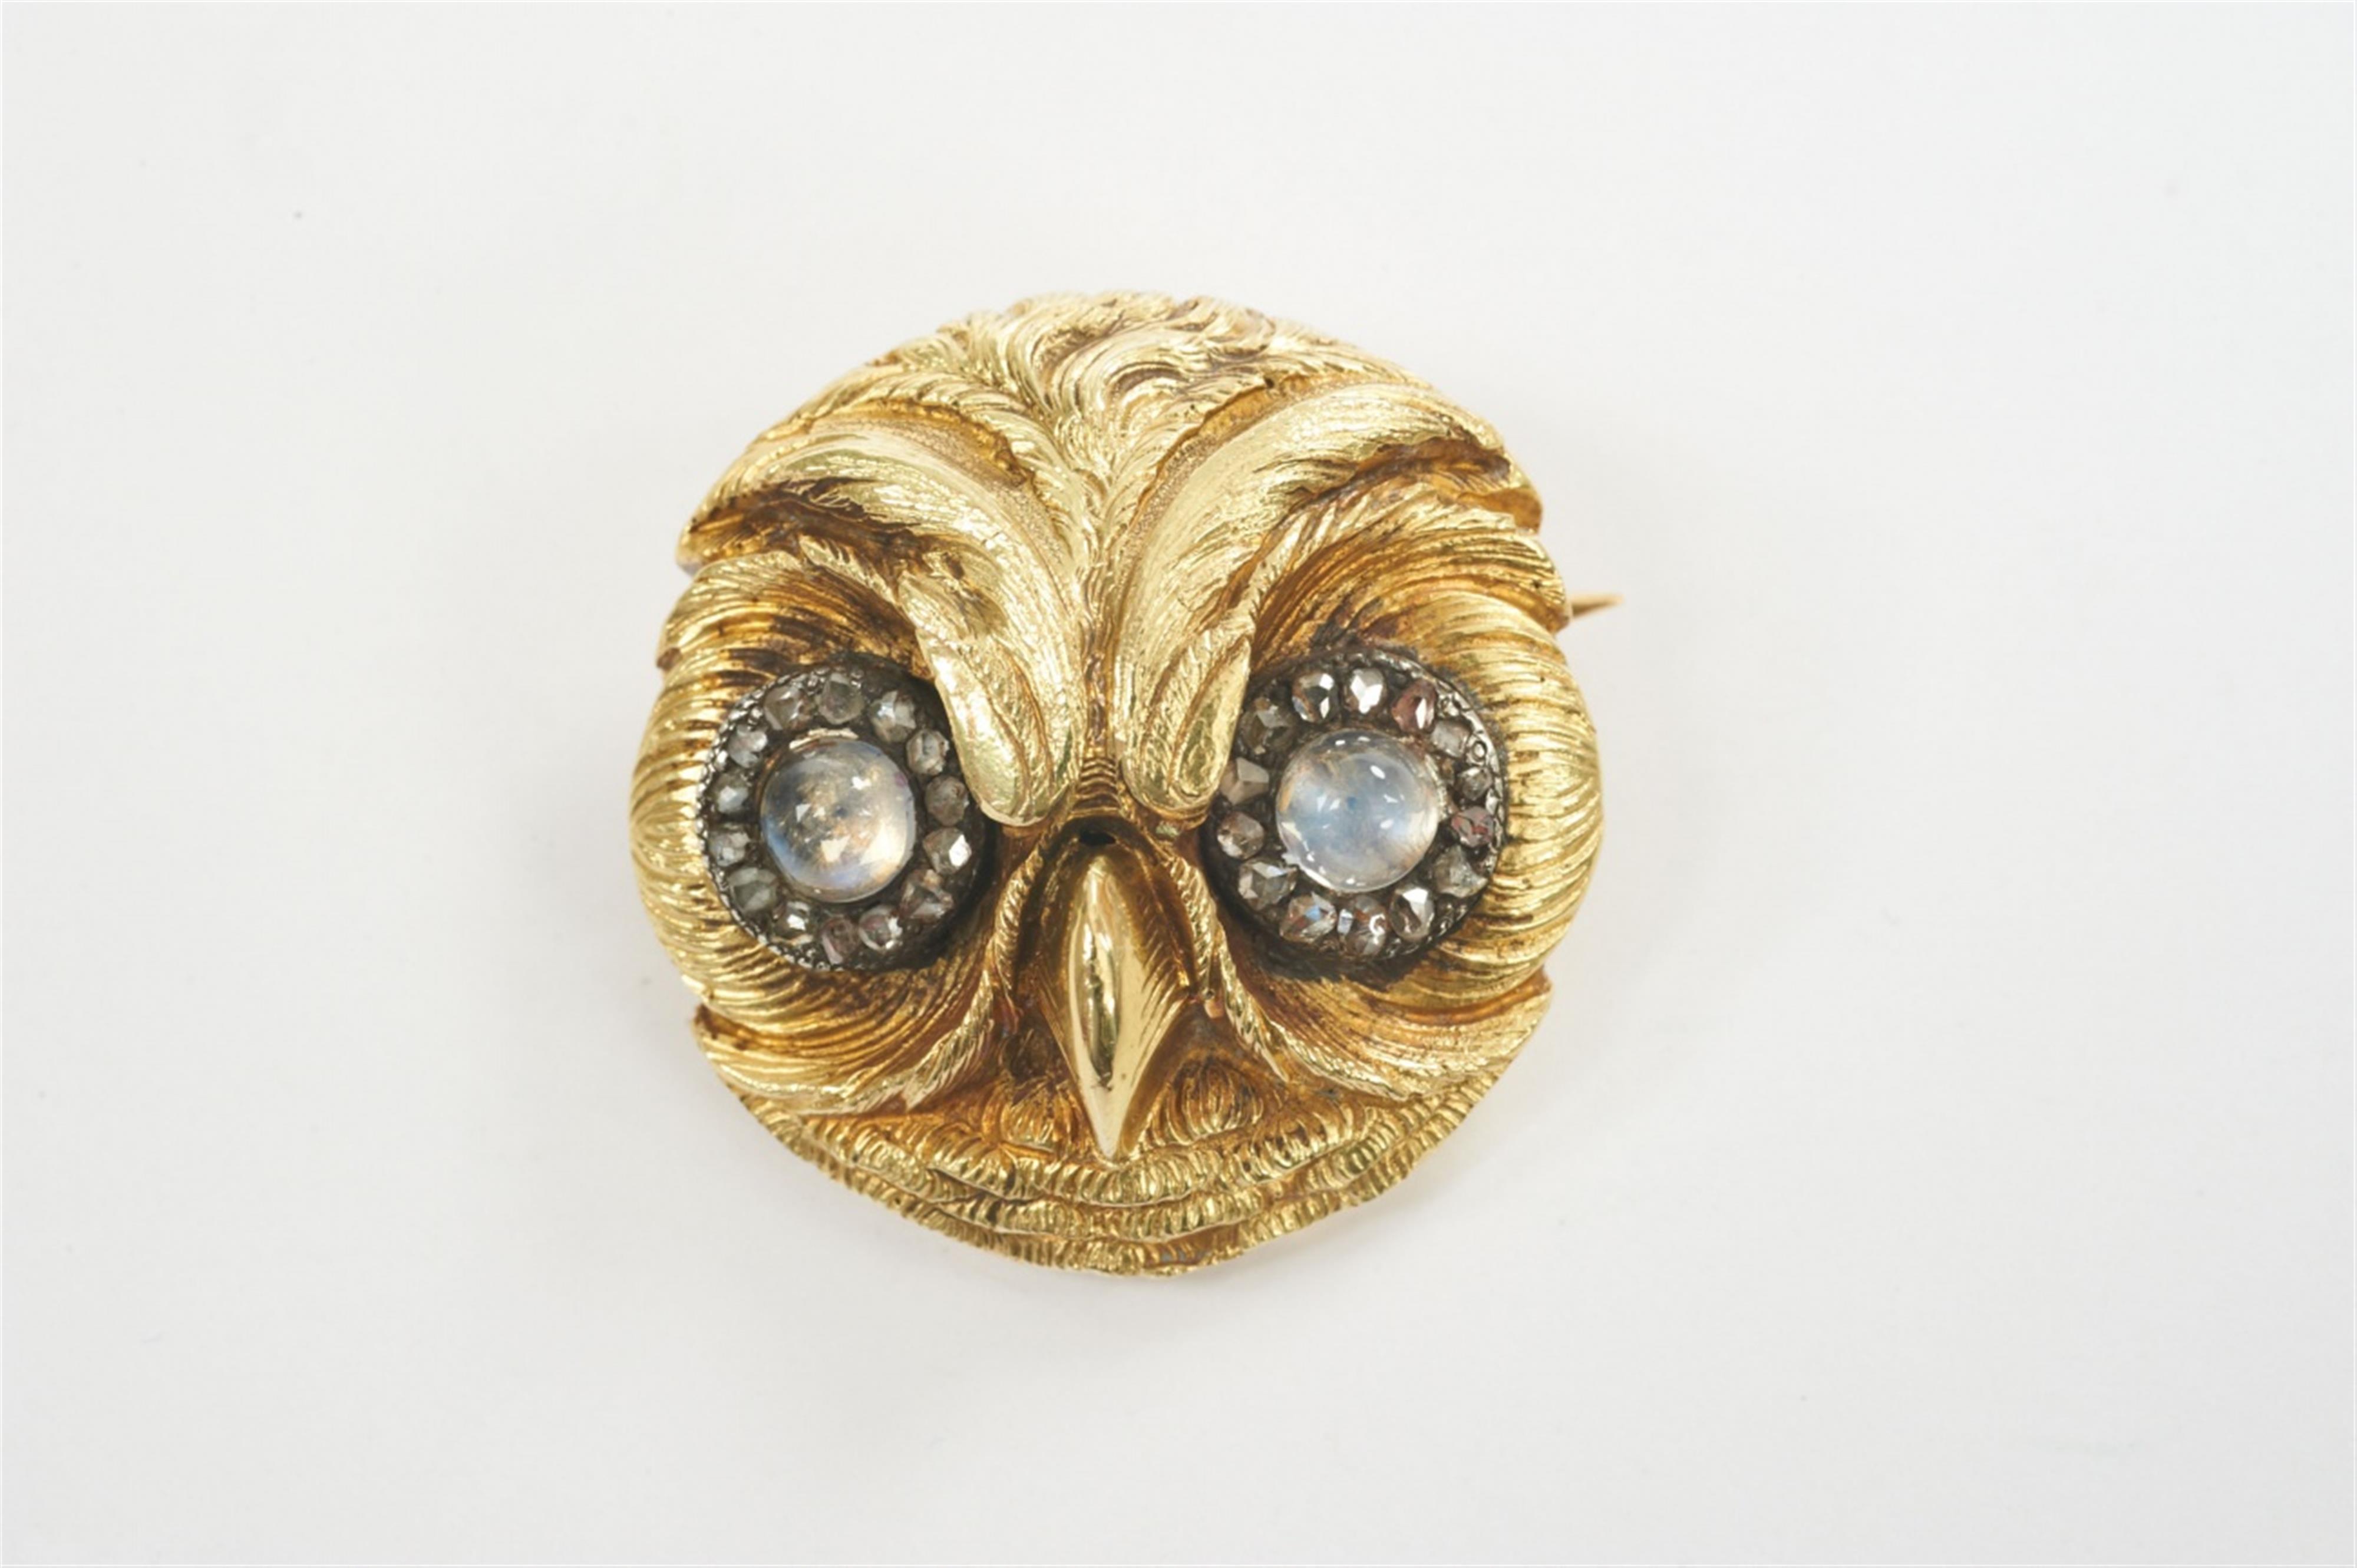 A French 18k gold, silver, diamond and moonstone owl brooch by Paul Robin - image-1